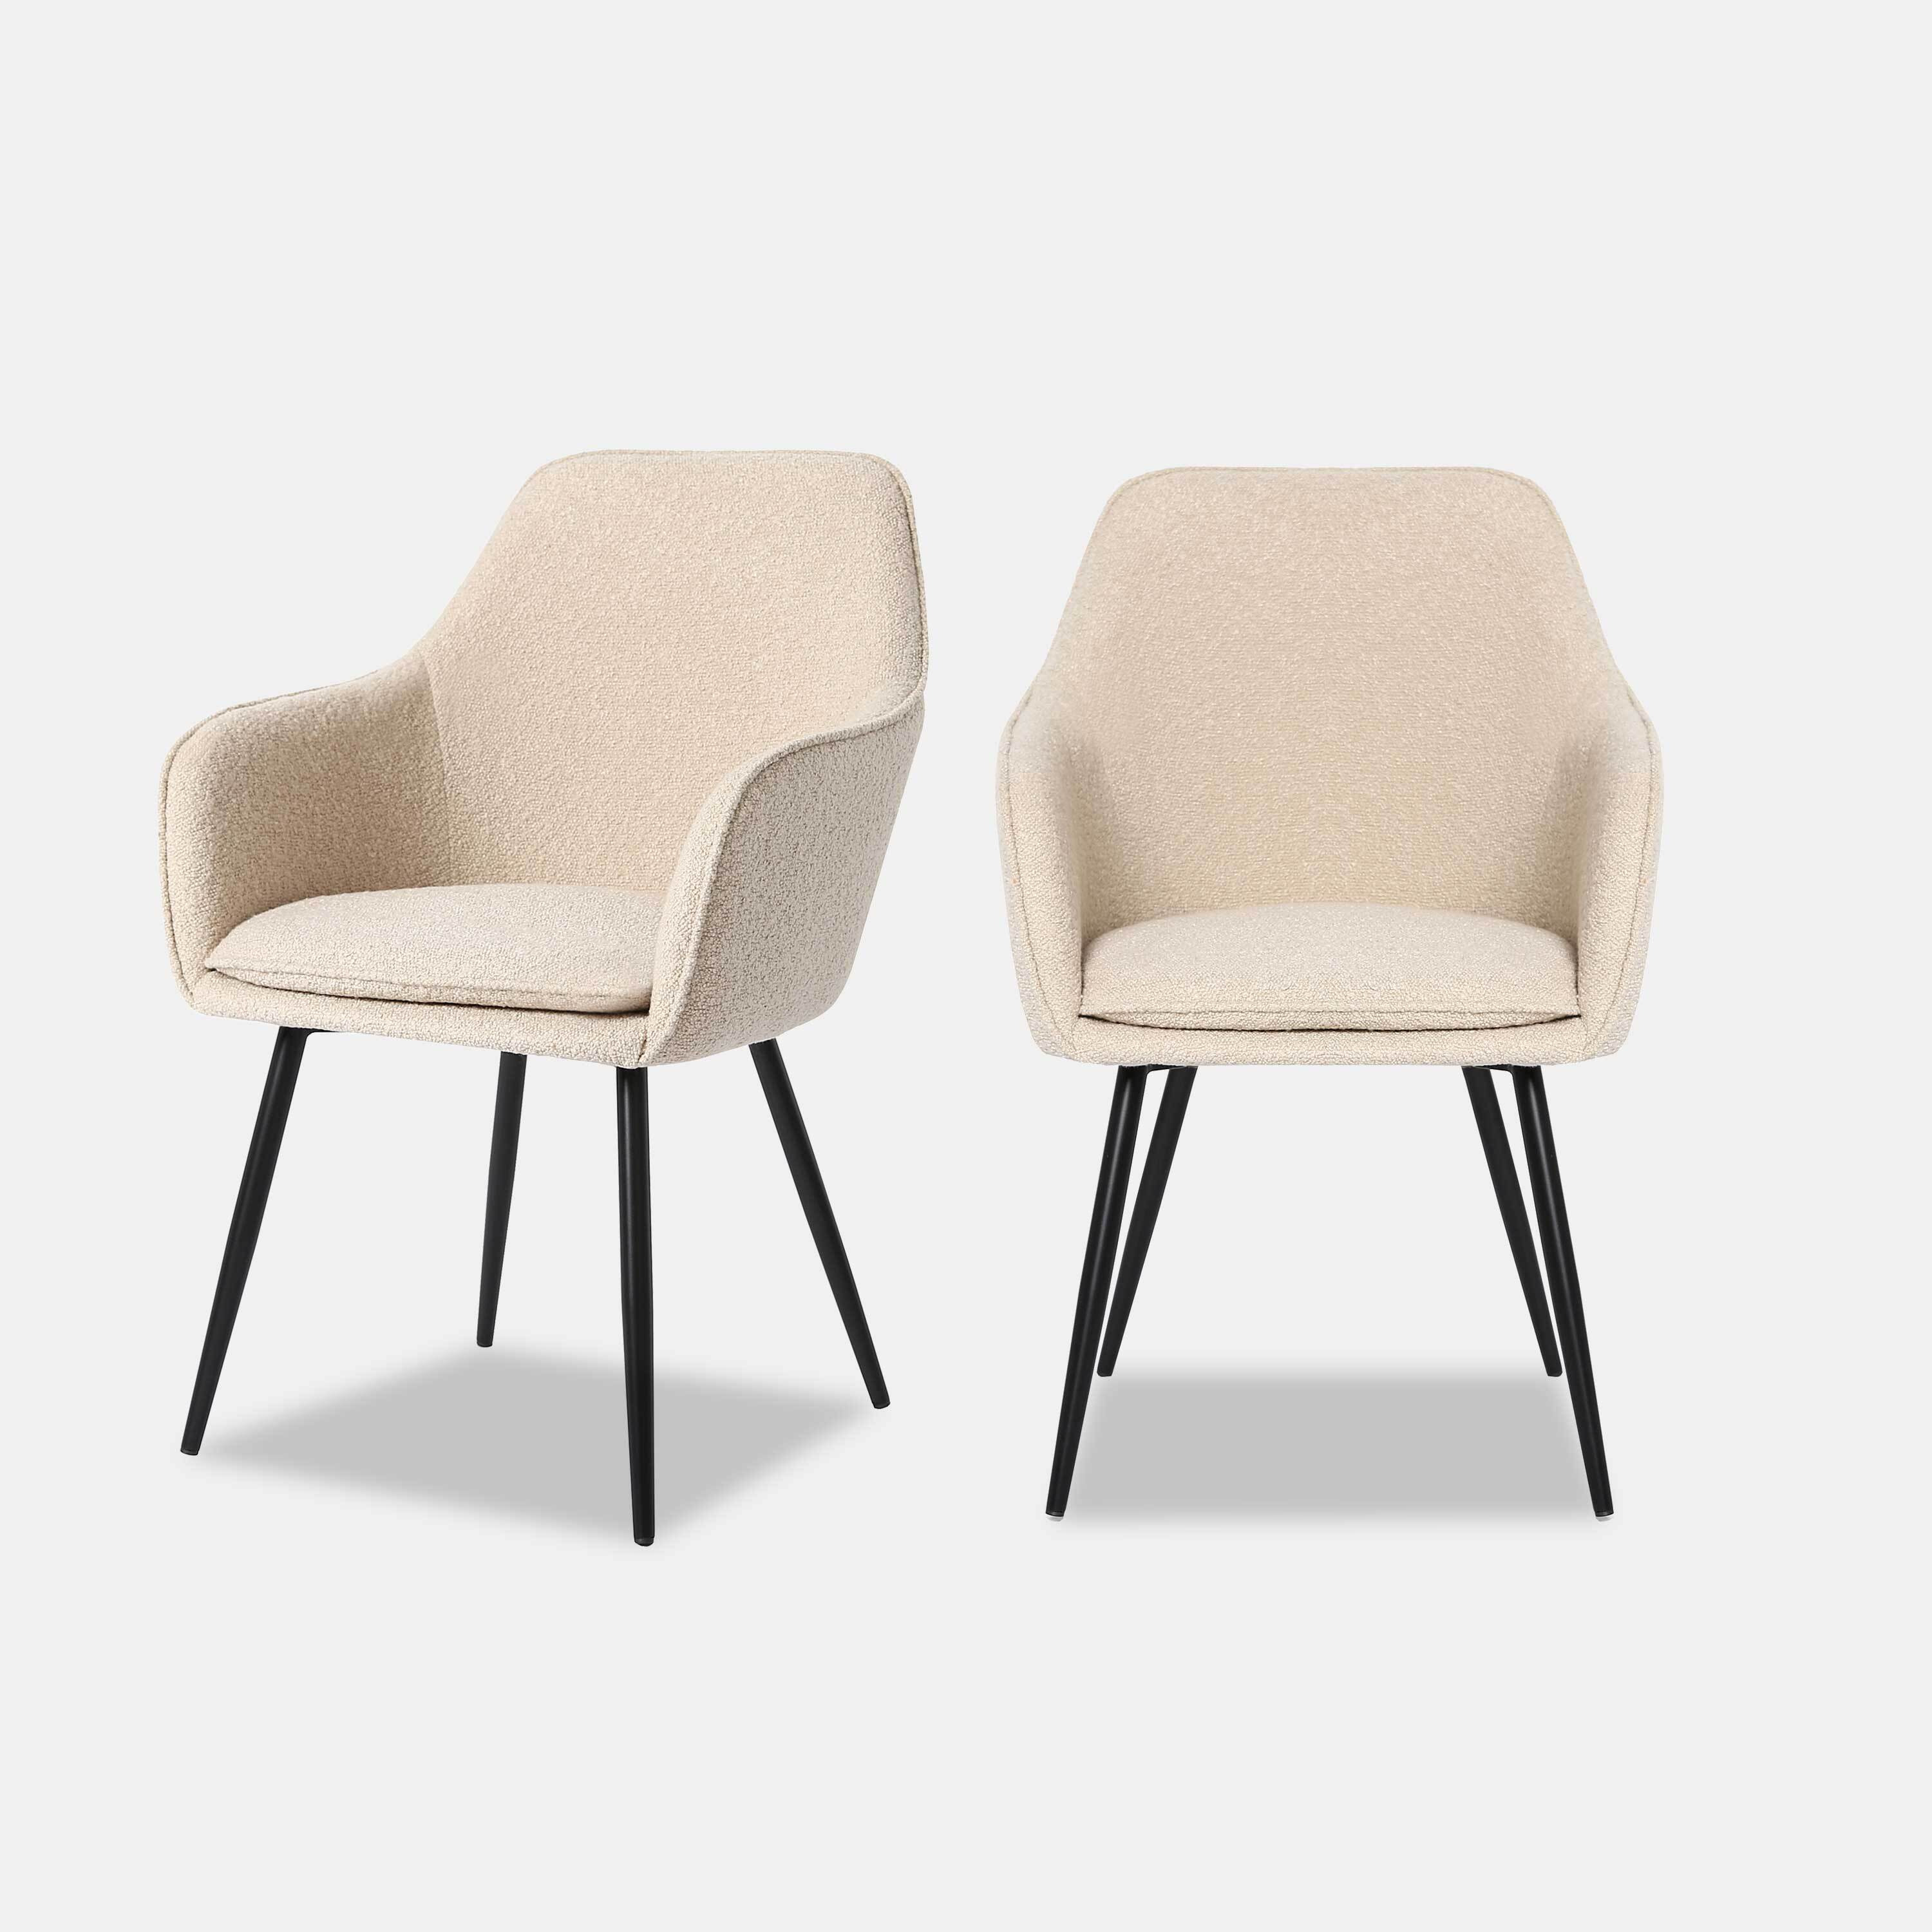 Boucle dining chairs - set of 2 upholstered dining chairs - MIA by housecosy - image 1